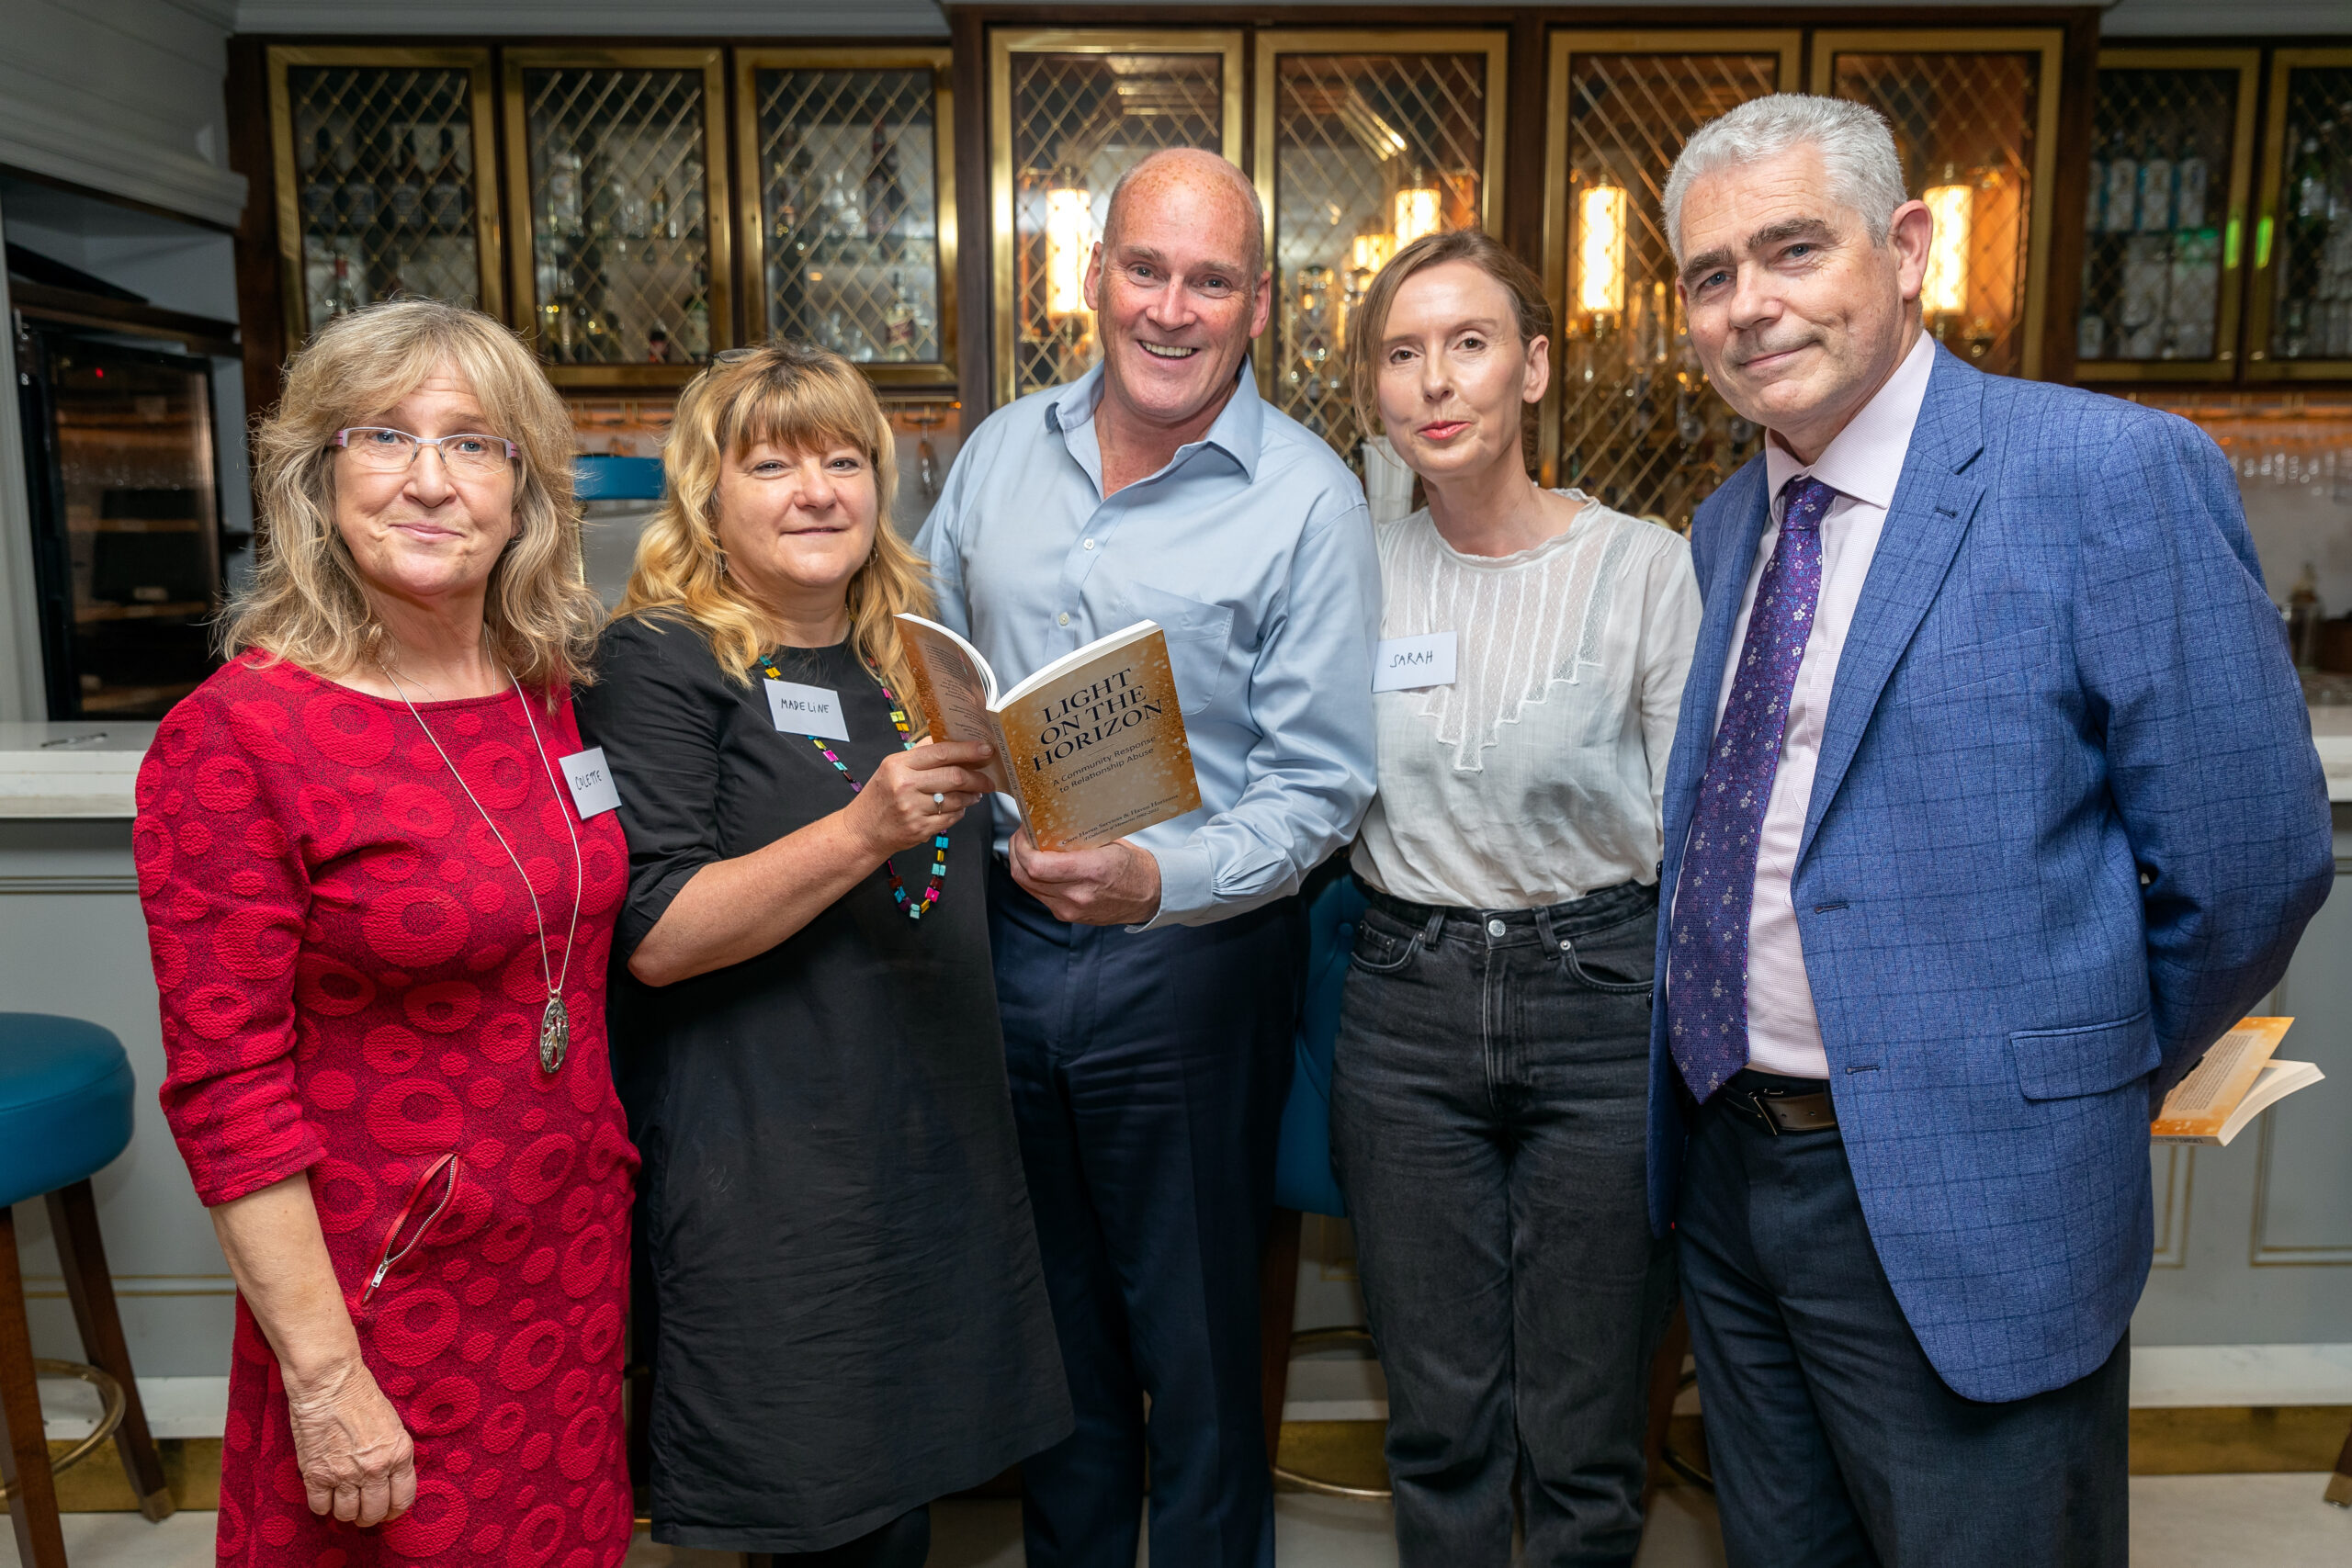 Clare Champion – Light on the Horizon book launch at the Old Ground Hotel, Ennis (2022)